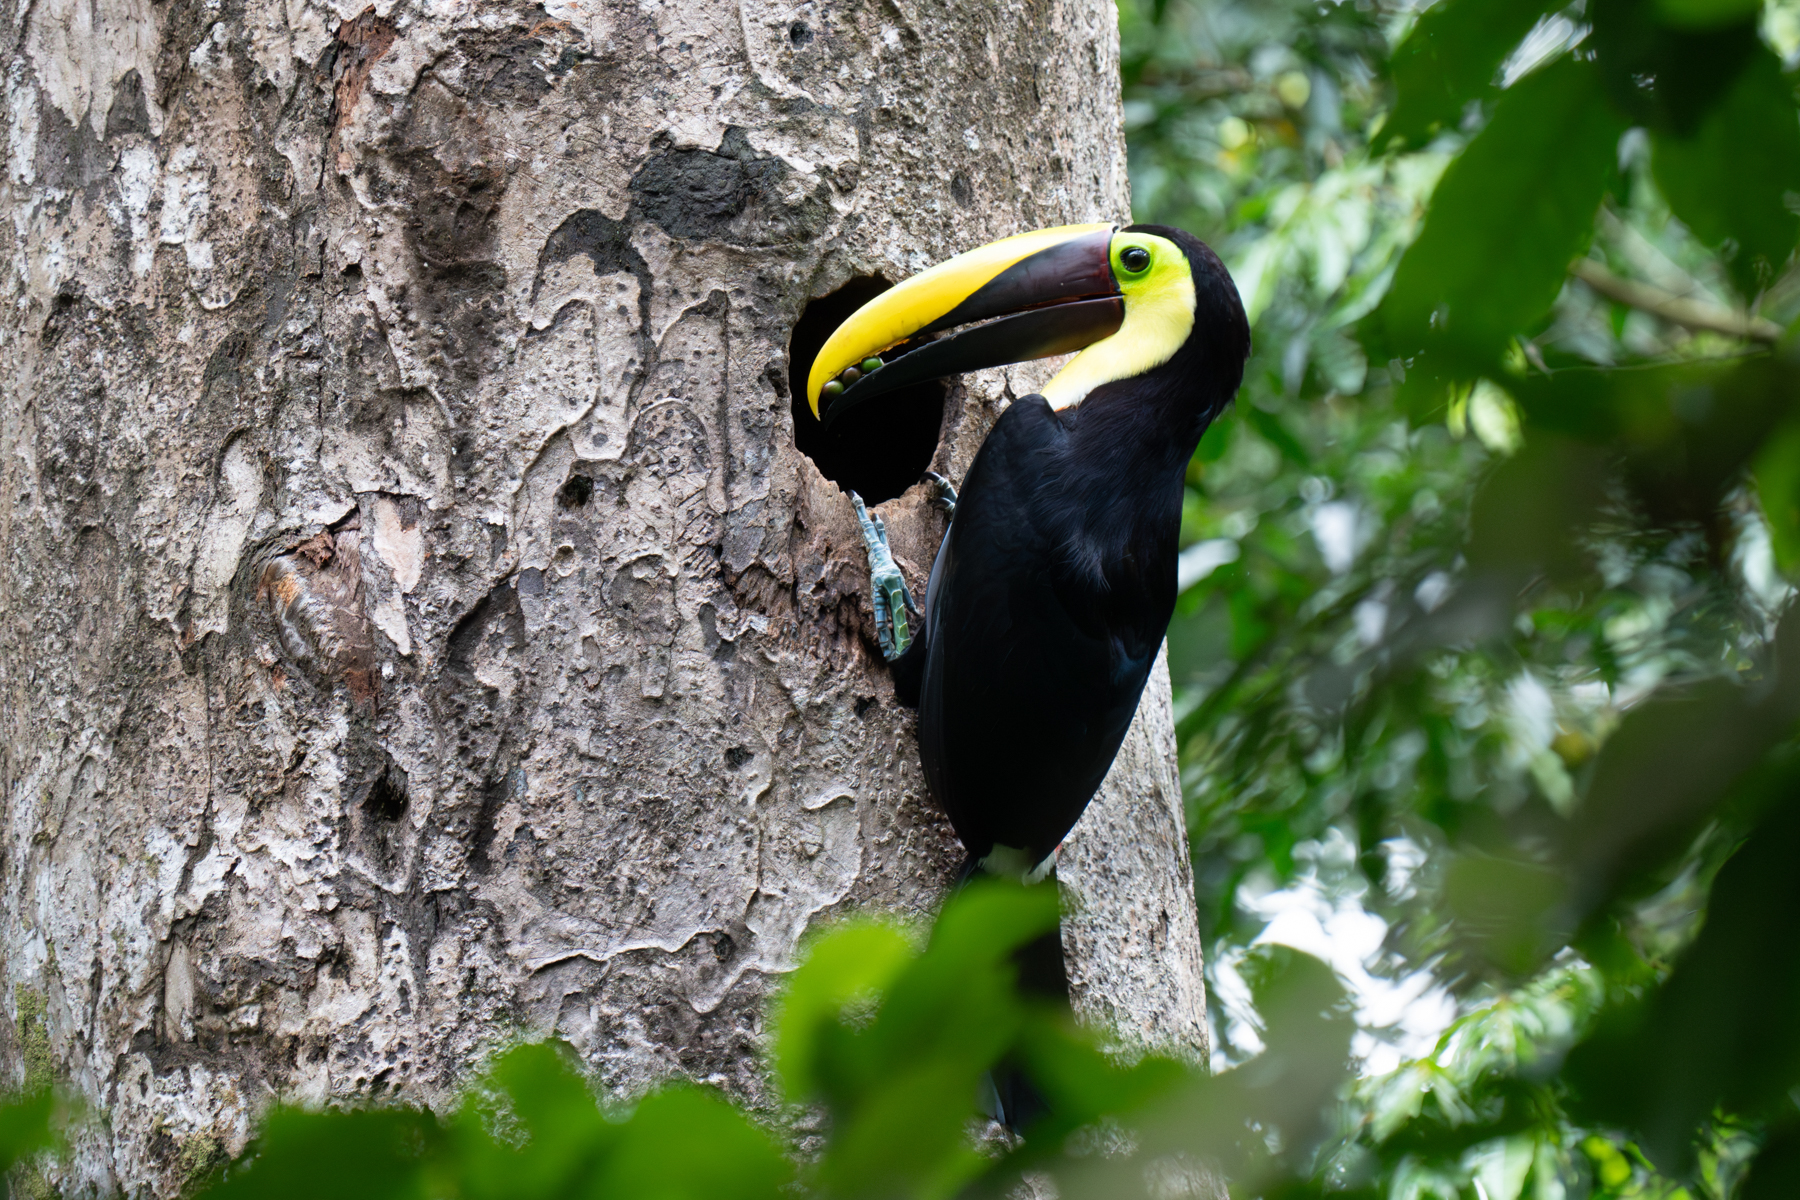 A Yellow-throated Toucan taking berries to his female on the nest (image by Inger Vandyke)